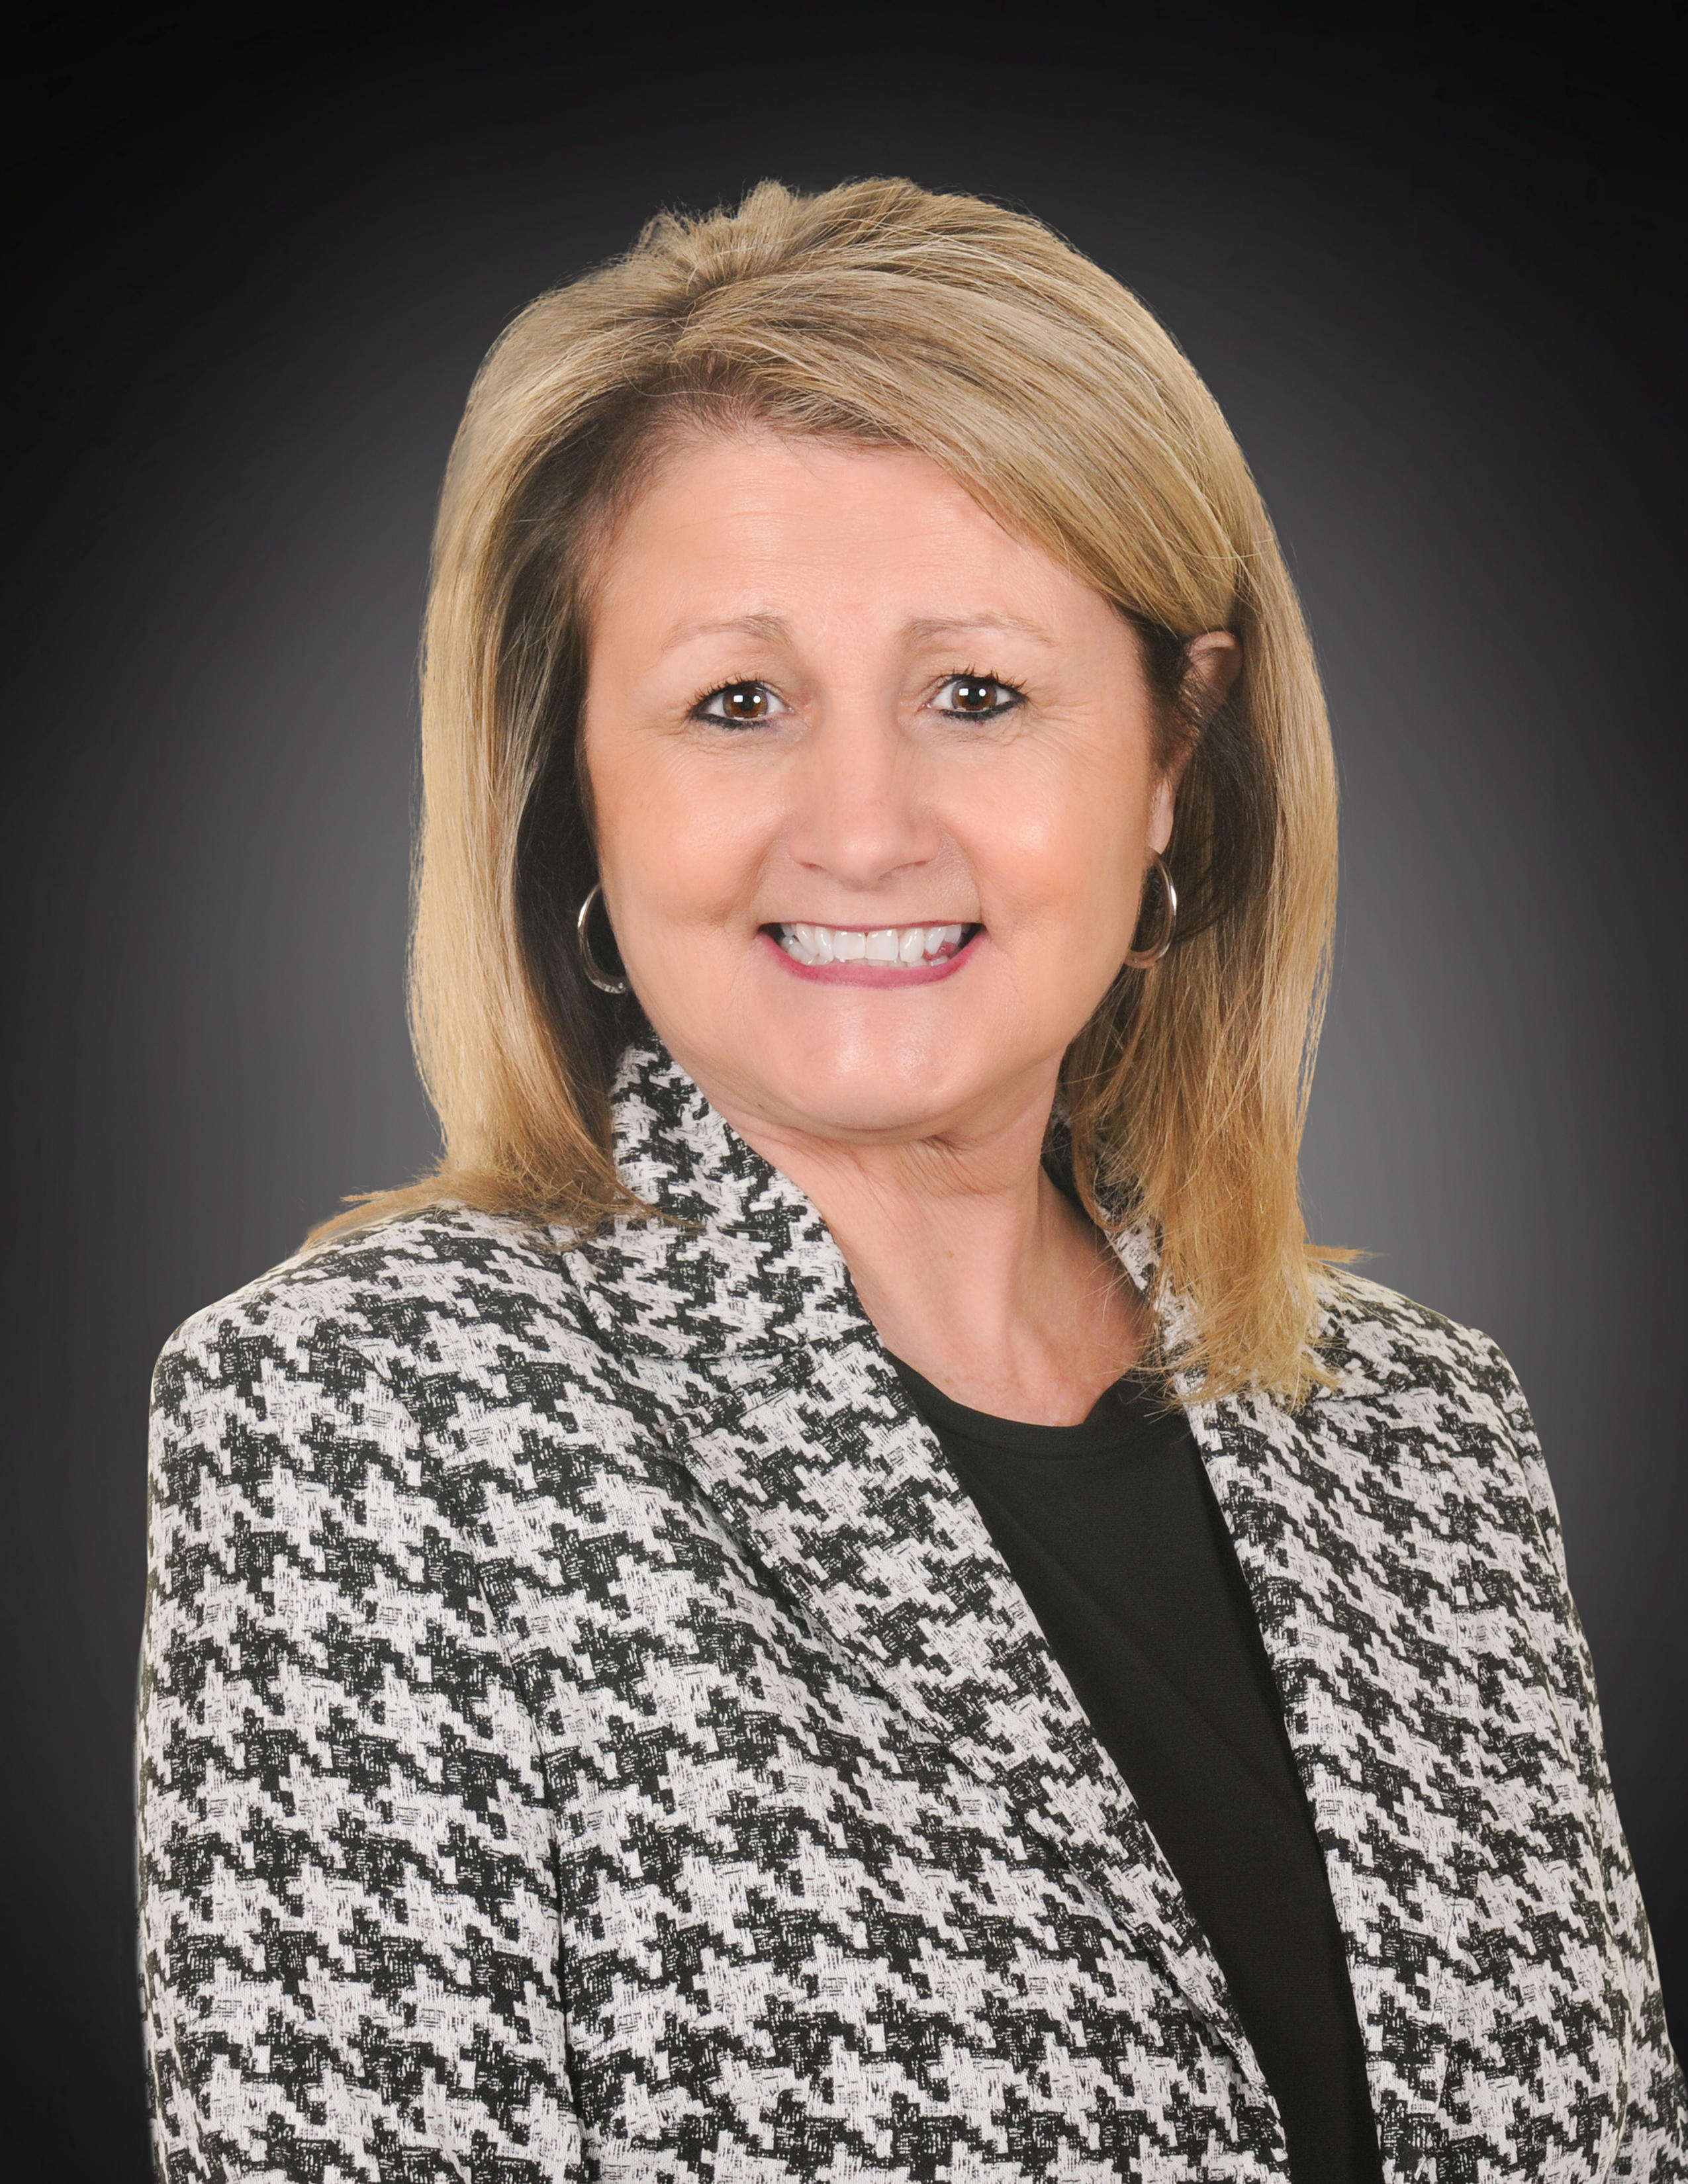 Tammy Coleman
Loan Officer